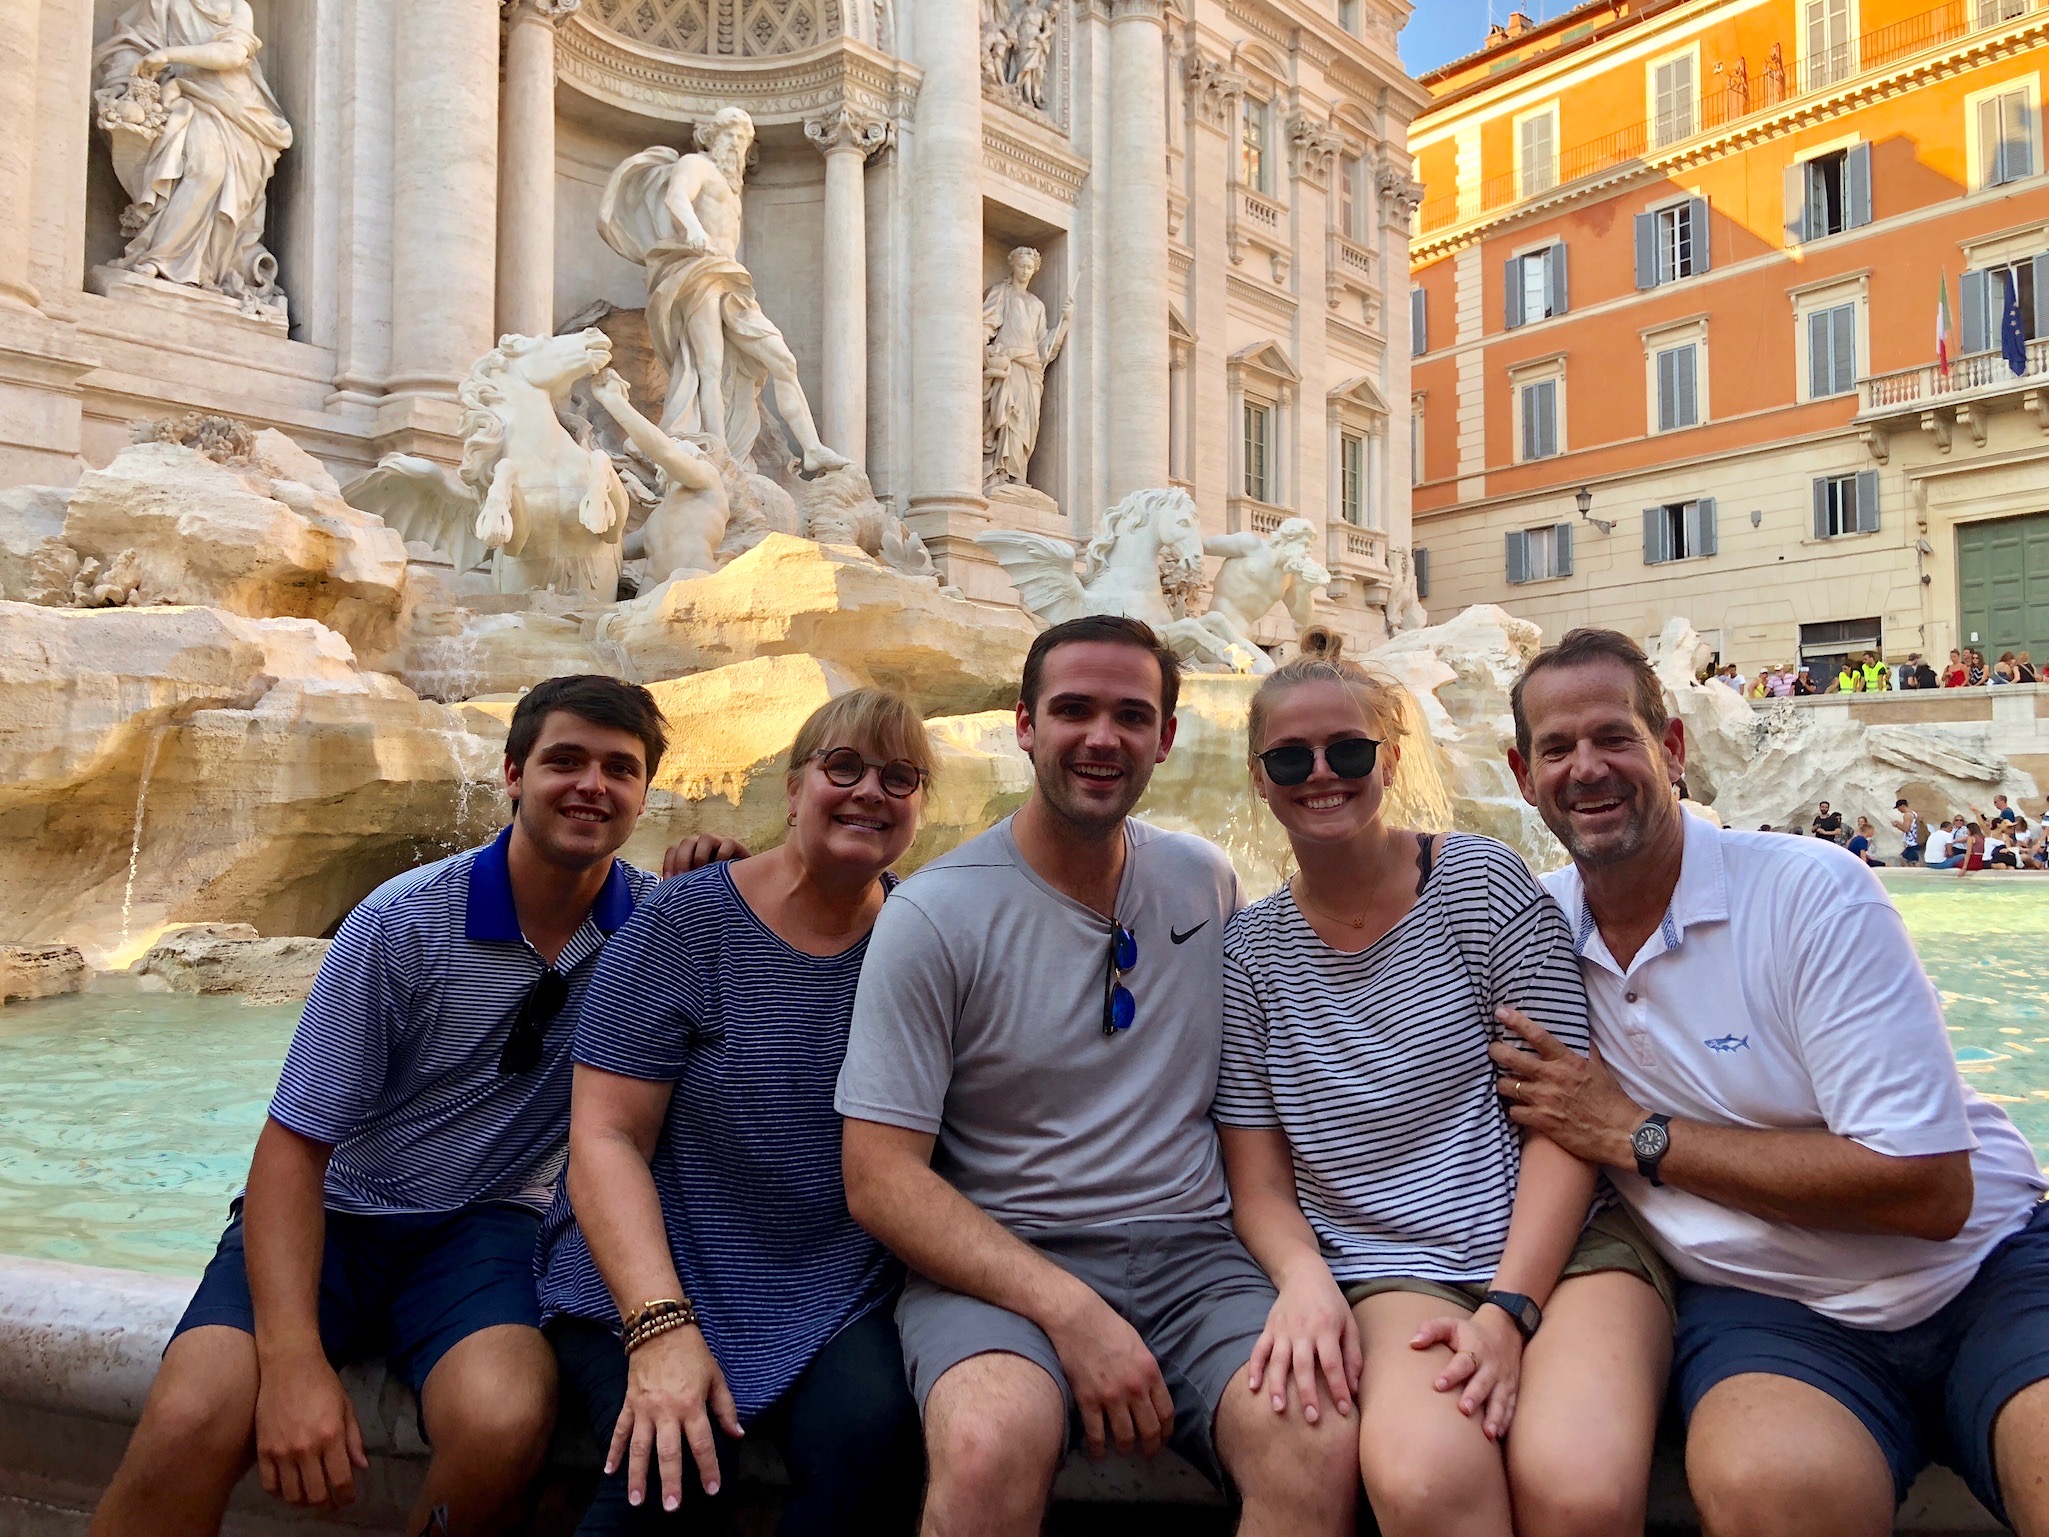 We ended up our stay in this beautiful city at the Trevi Fountain in the Trevi district and just chilled there for a while. So refreshing to feel the mist of the water while looking at this incredible sculpture. Throw three coins in and make a wish!